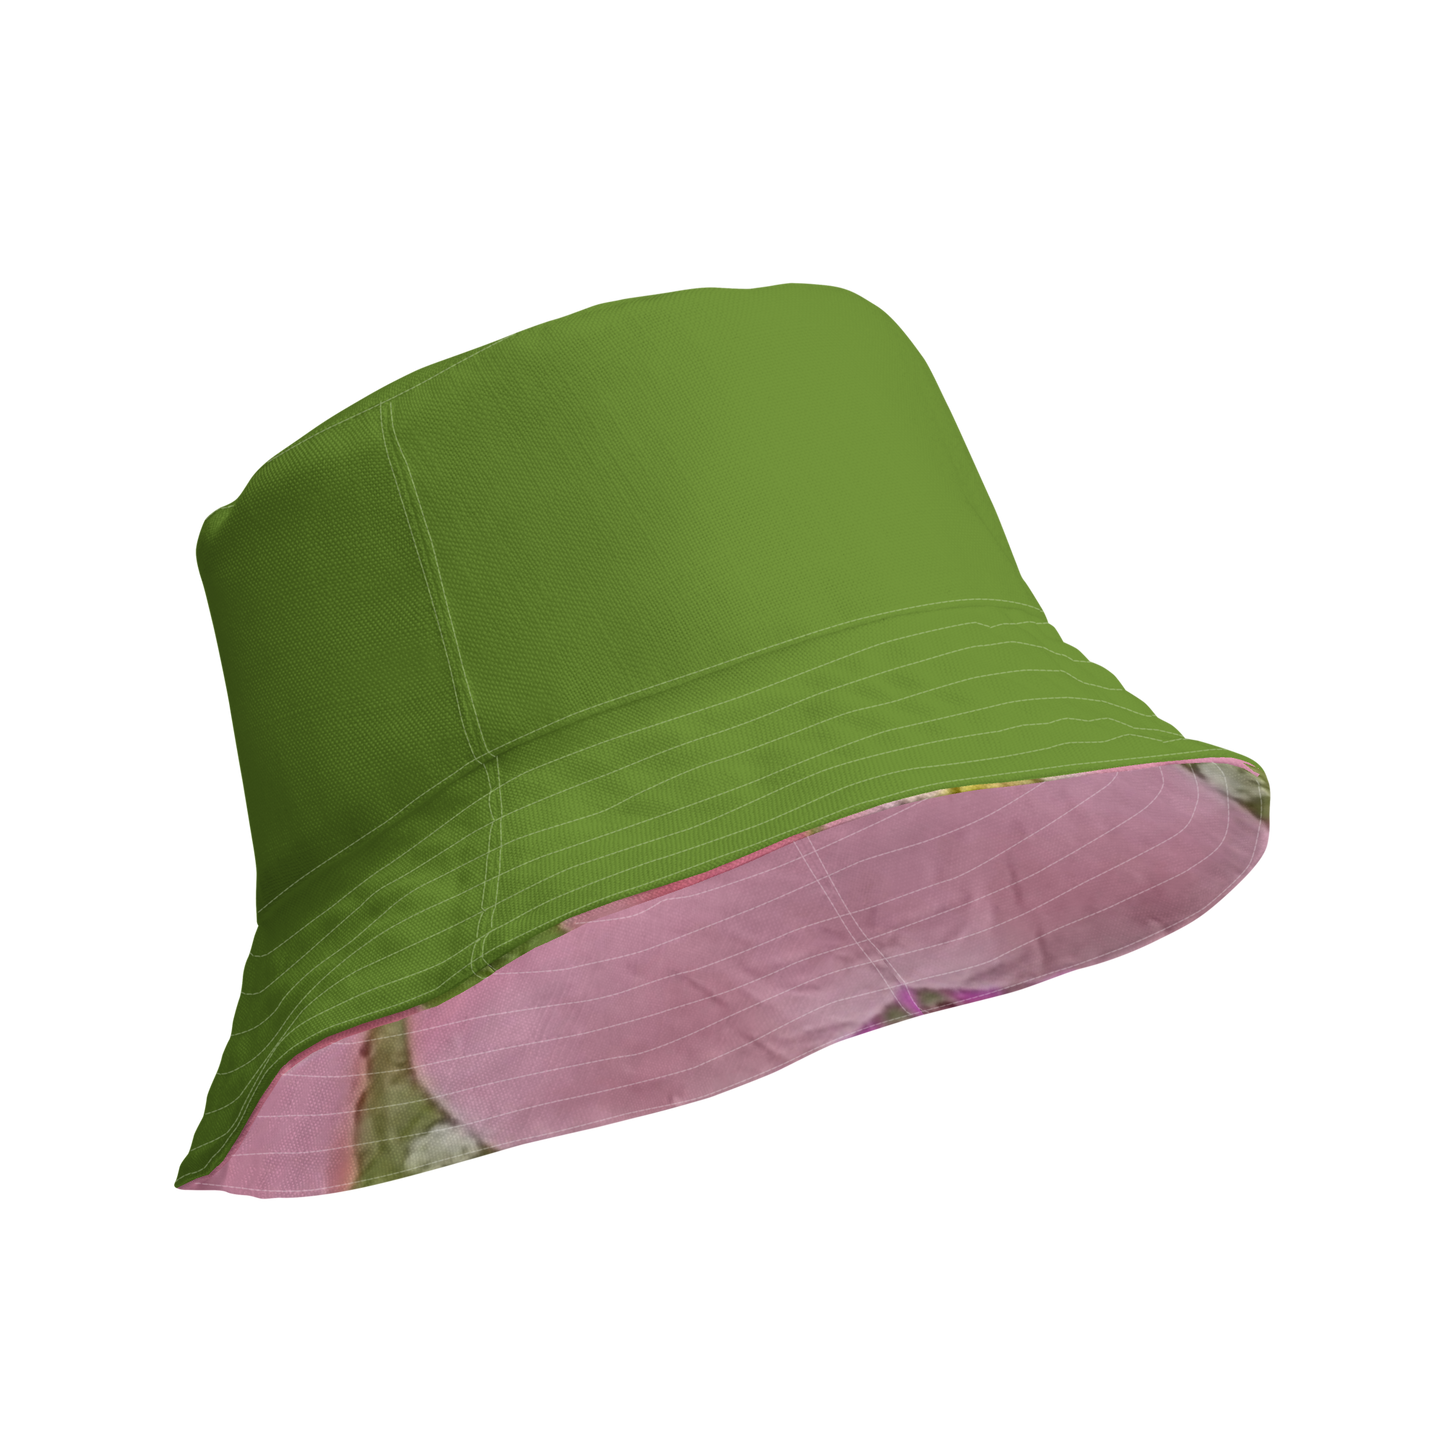 The FLOWER LOVE Collection - "Pretty Pink Poppies" Design Premium Reversible Bucket Hat - Green Inside - Beach Hat, Gifts for Her